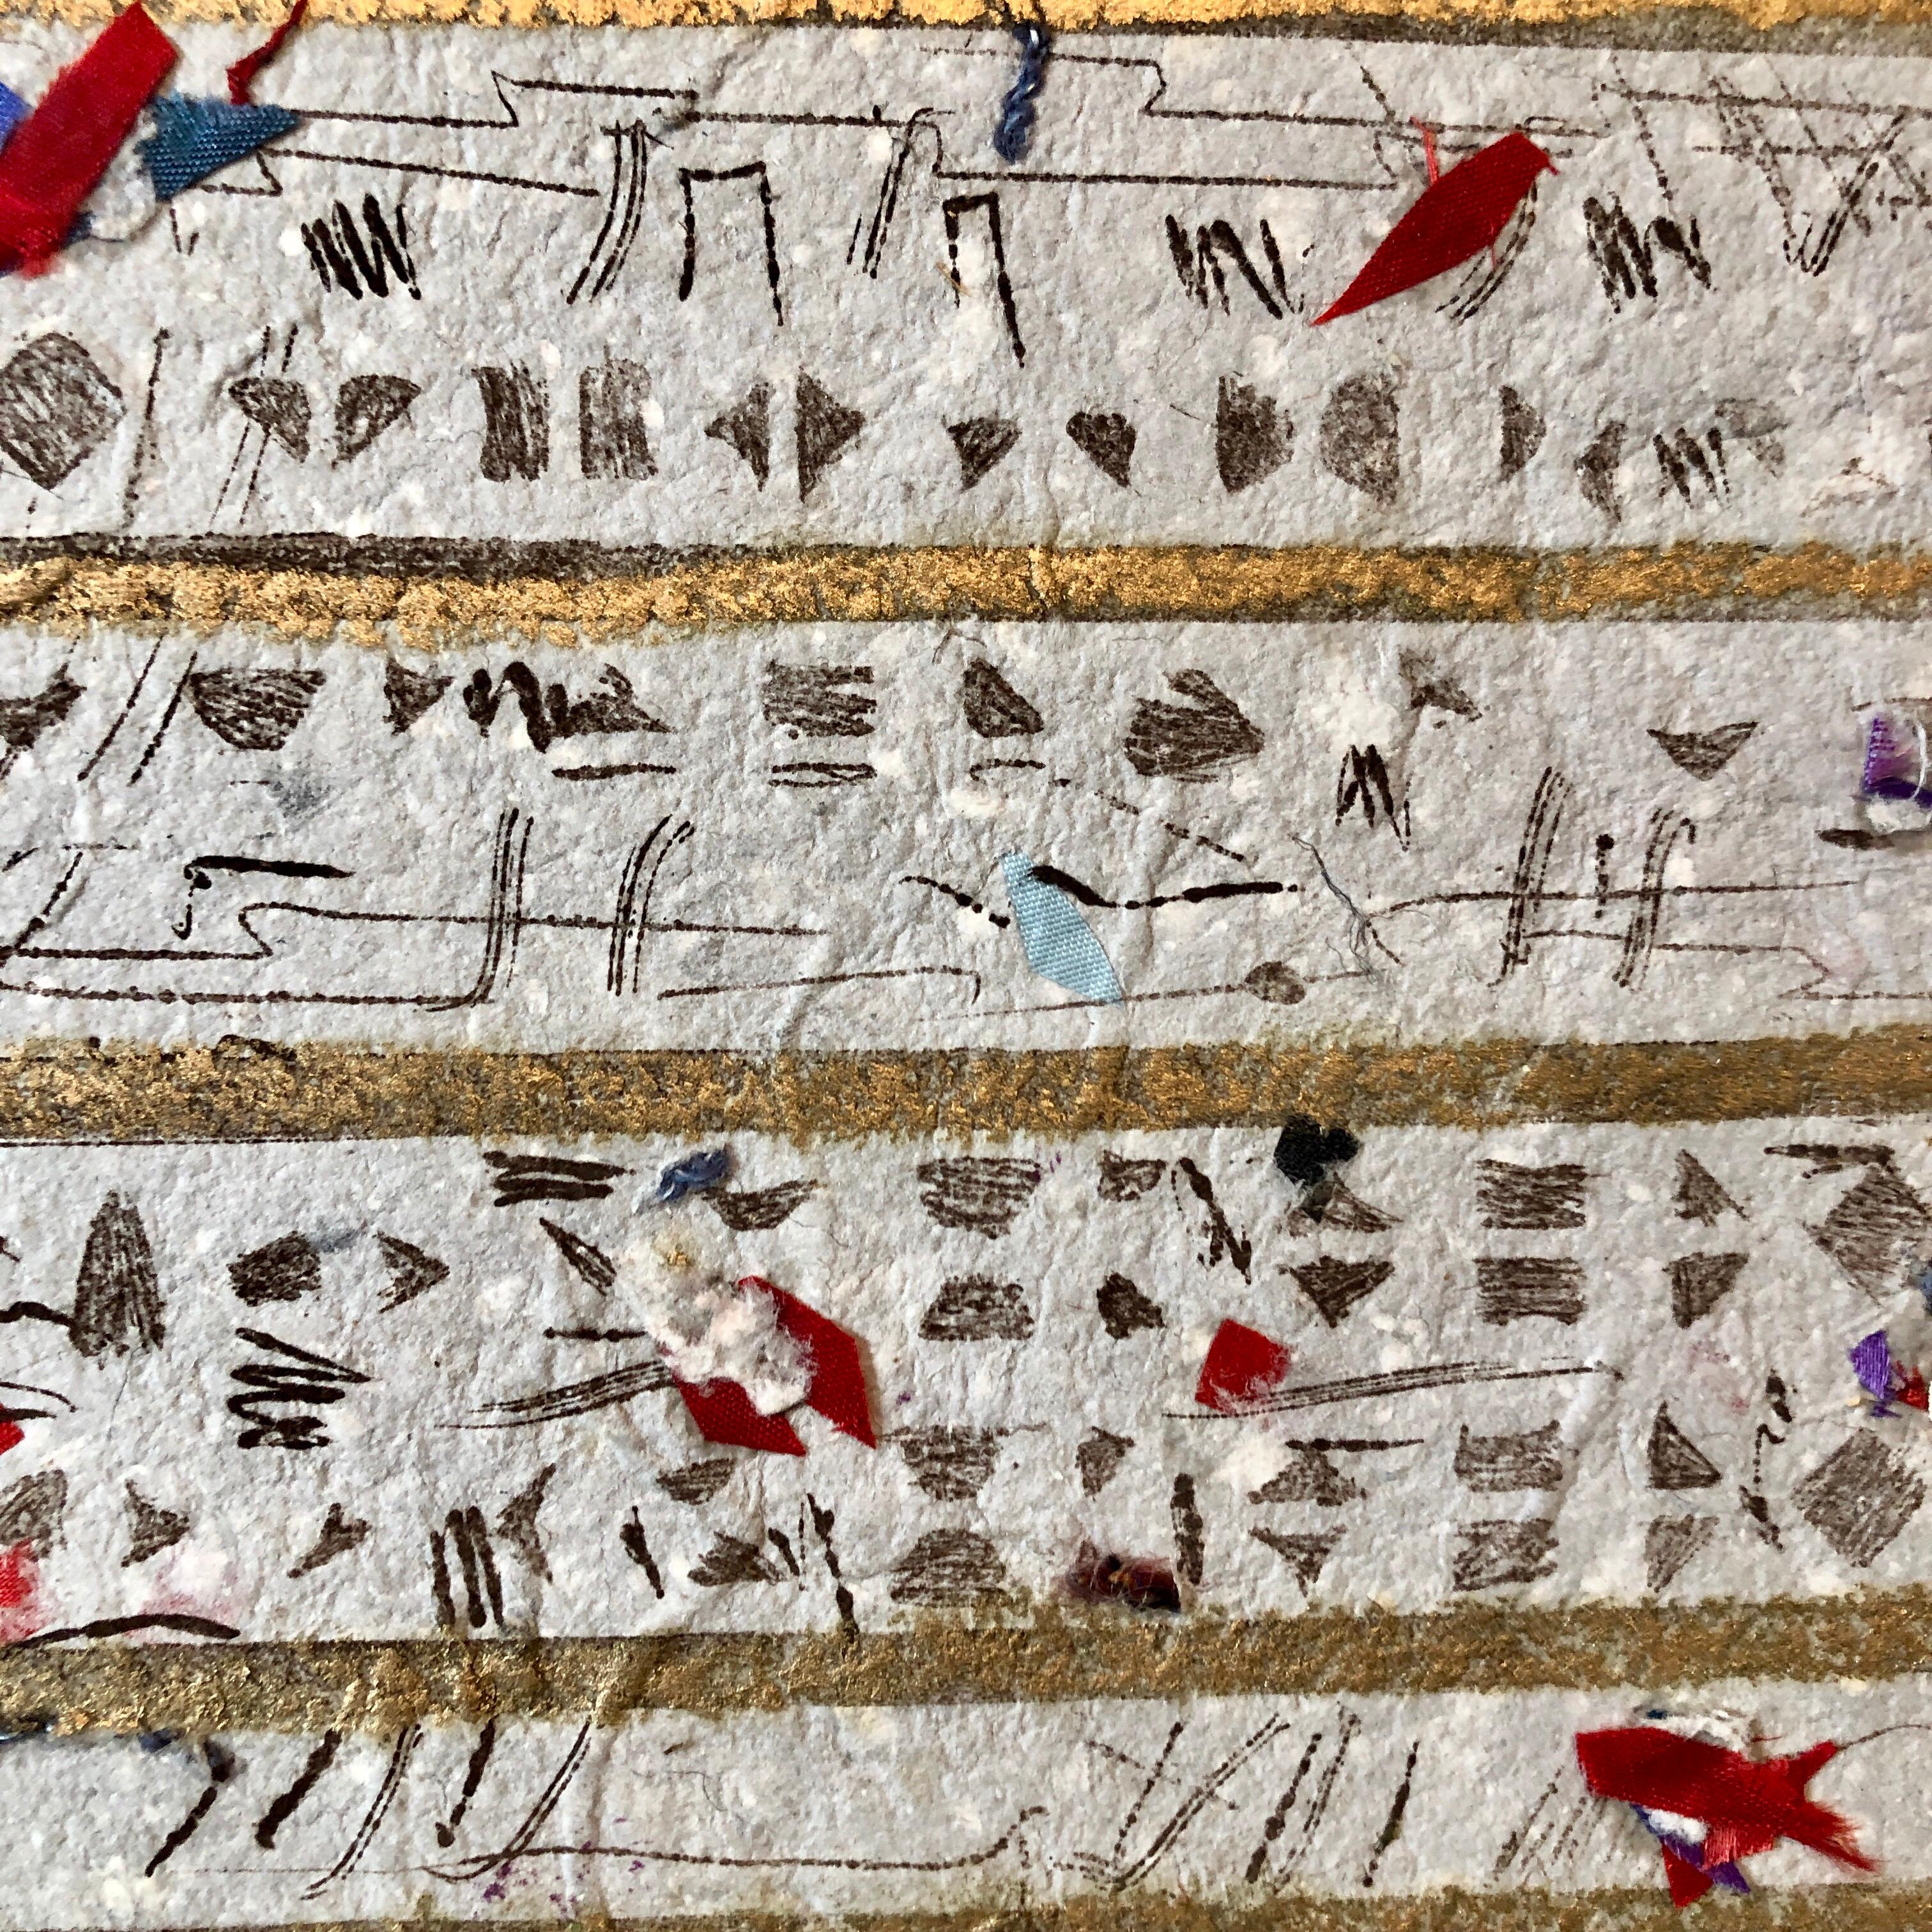 Unique Mixed Media on Handmade Paper with Gold Leaf Modernist Edition  - American Modern Mixed Media Art by Pat Hammerman